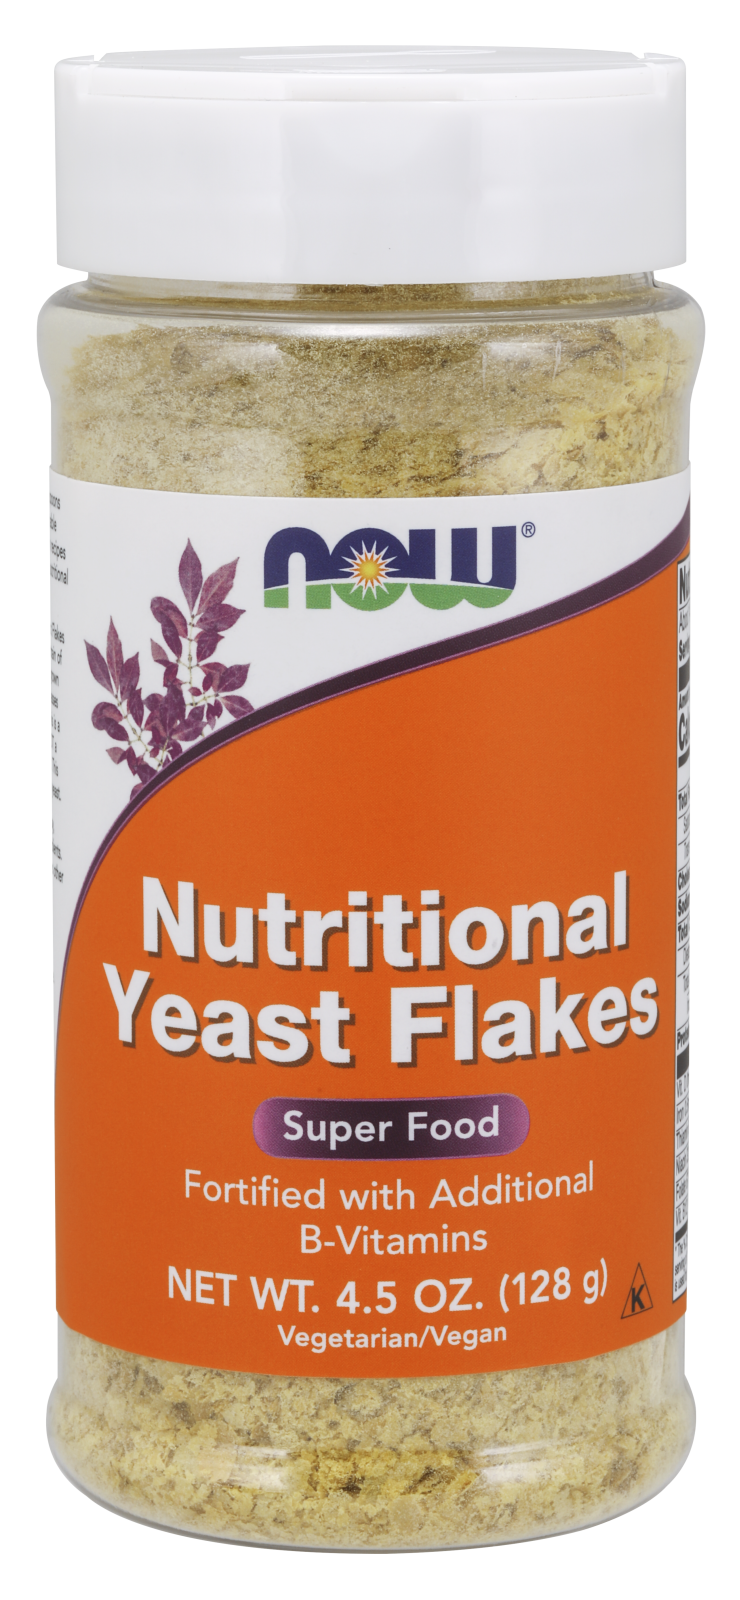 Nutritional Yeast Flakes - 4.5 oz.